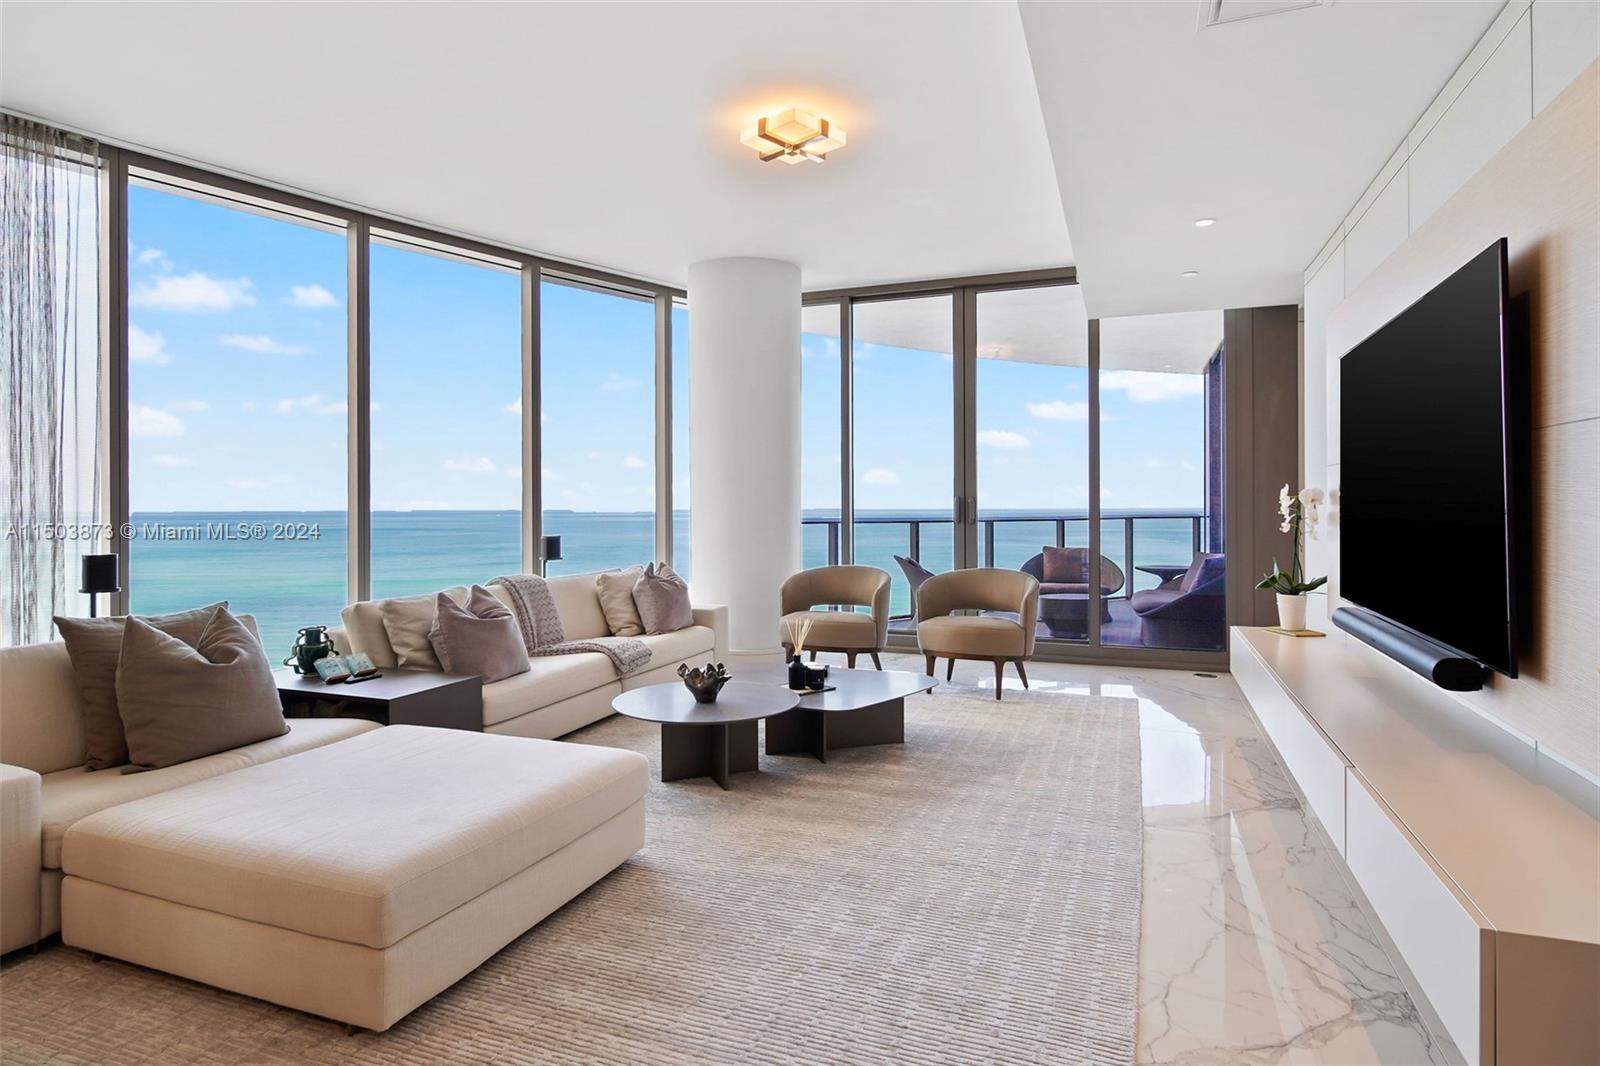 Welcome to the epitome of luxury living at The Ritz Carlton Sunny Isles, where this exquisite flow-through 4-bed & 4.5 bath oceanfront condo in over 3,000 Sq.ft. of living space awaits you.  Perched on the pristine shores of Sunny Isles Beach, this elegant furnished home offers spacious interiors & an open living space w/room for family & friends to relax & unwind. Located just minutes from upscale shopping, fine dining, & cultural attractions & conveniently positioned between Miami & Ft. Lauderdale, making it easy to access both cities & their international airports.
Enjoy 5-star Ritz Carlton services, including concierge, valet, 24-hour security, on-site restaurant, movie theater, wine lounge, spa, fitness center & so much more. Also available unfurnished for $4,895,000.